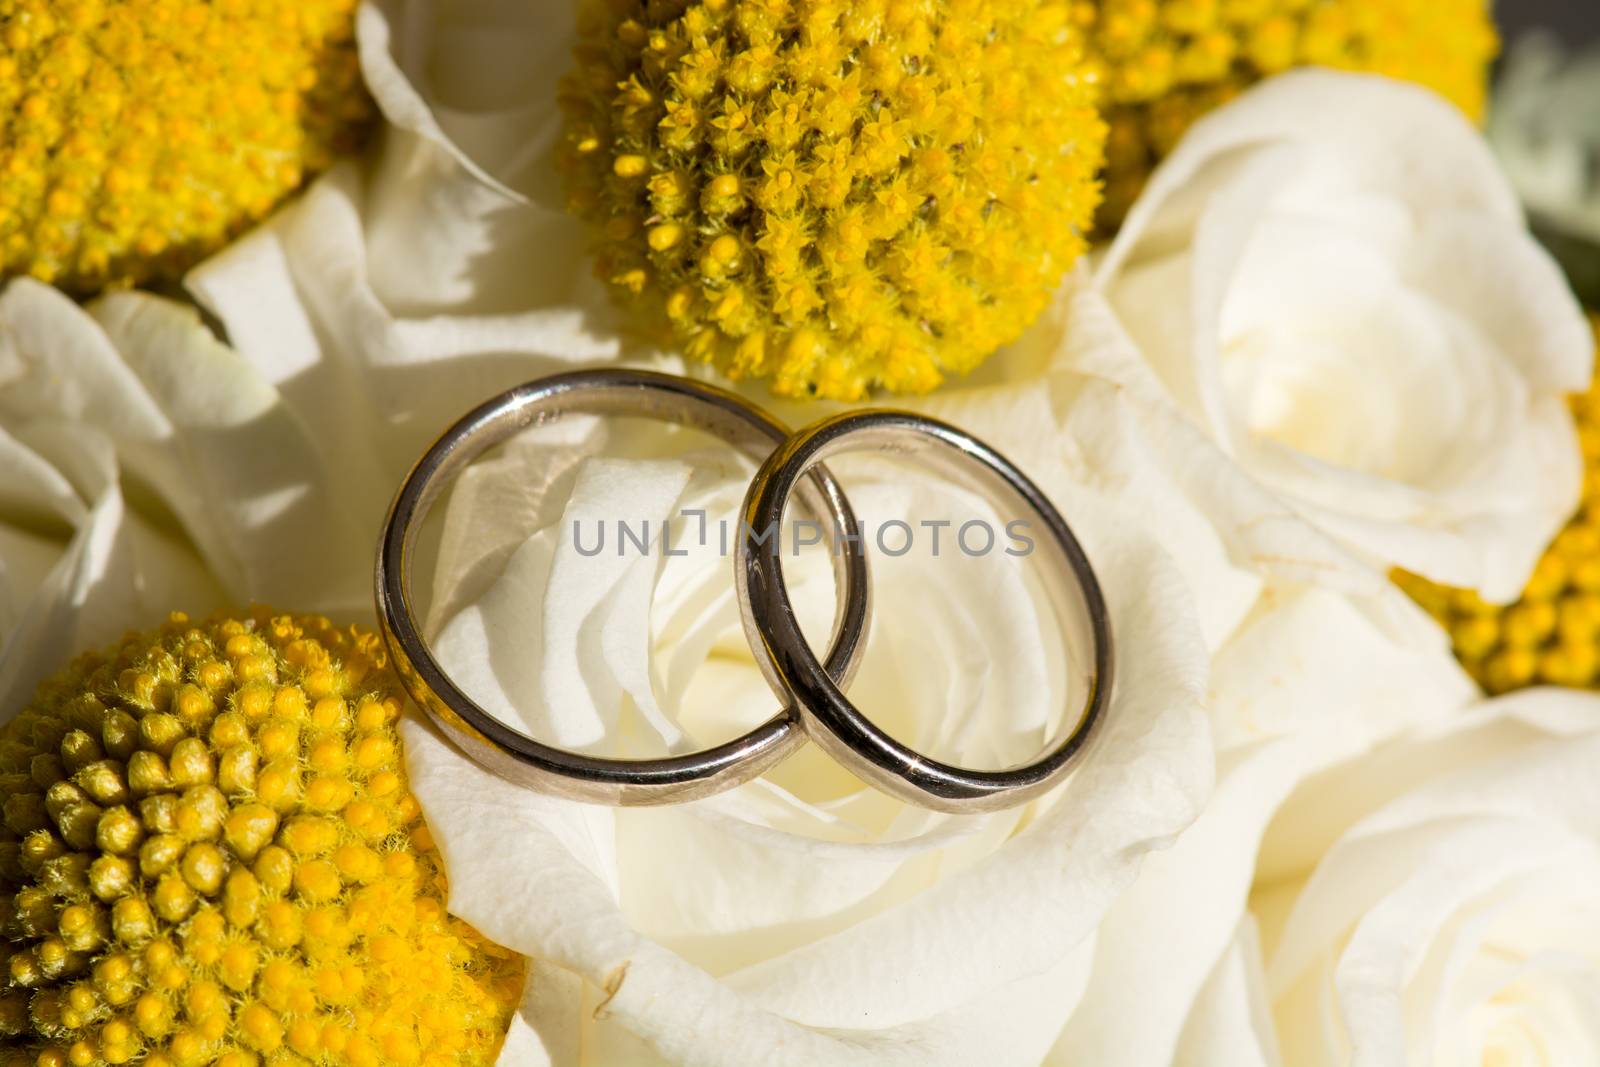 Details of wedding rings on a bridal bouquet in warm sun light